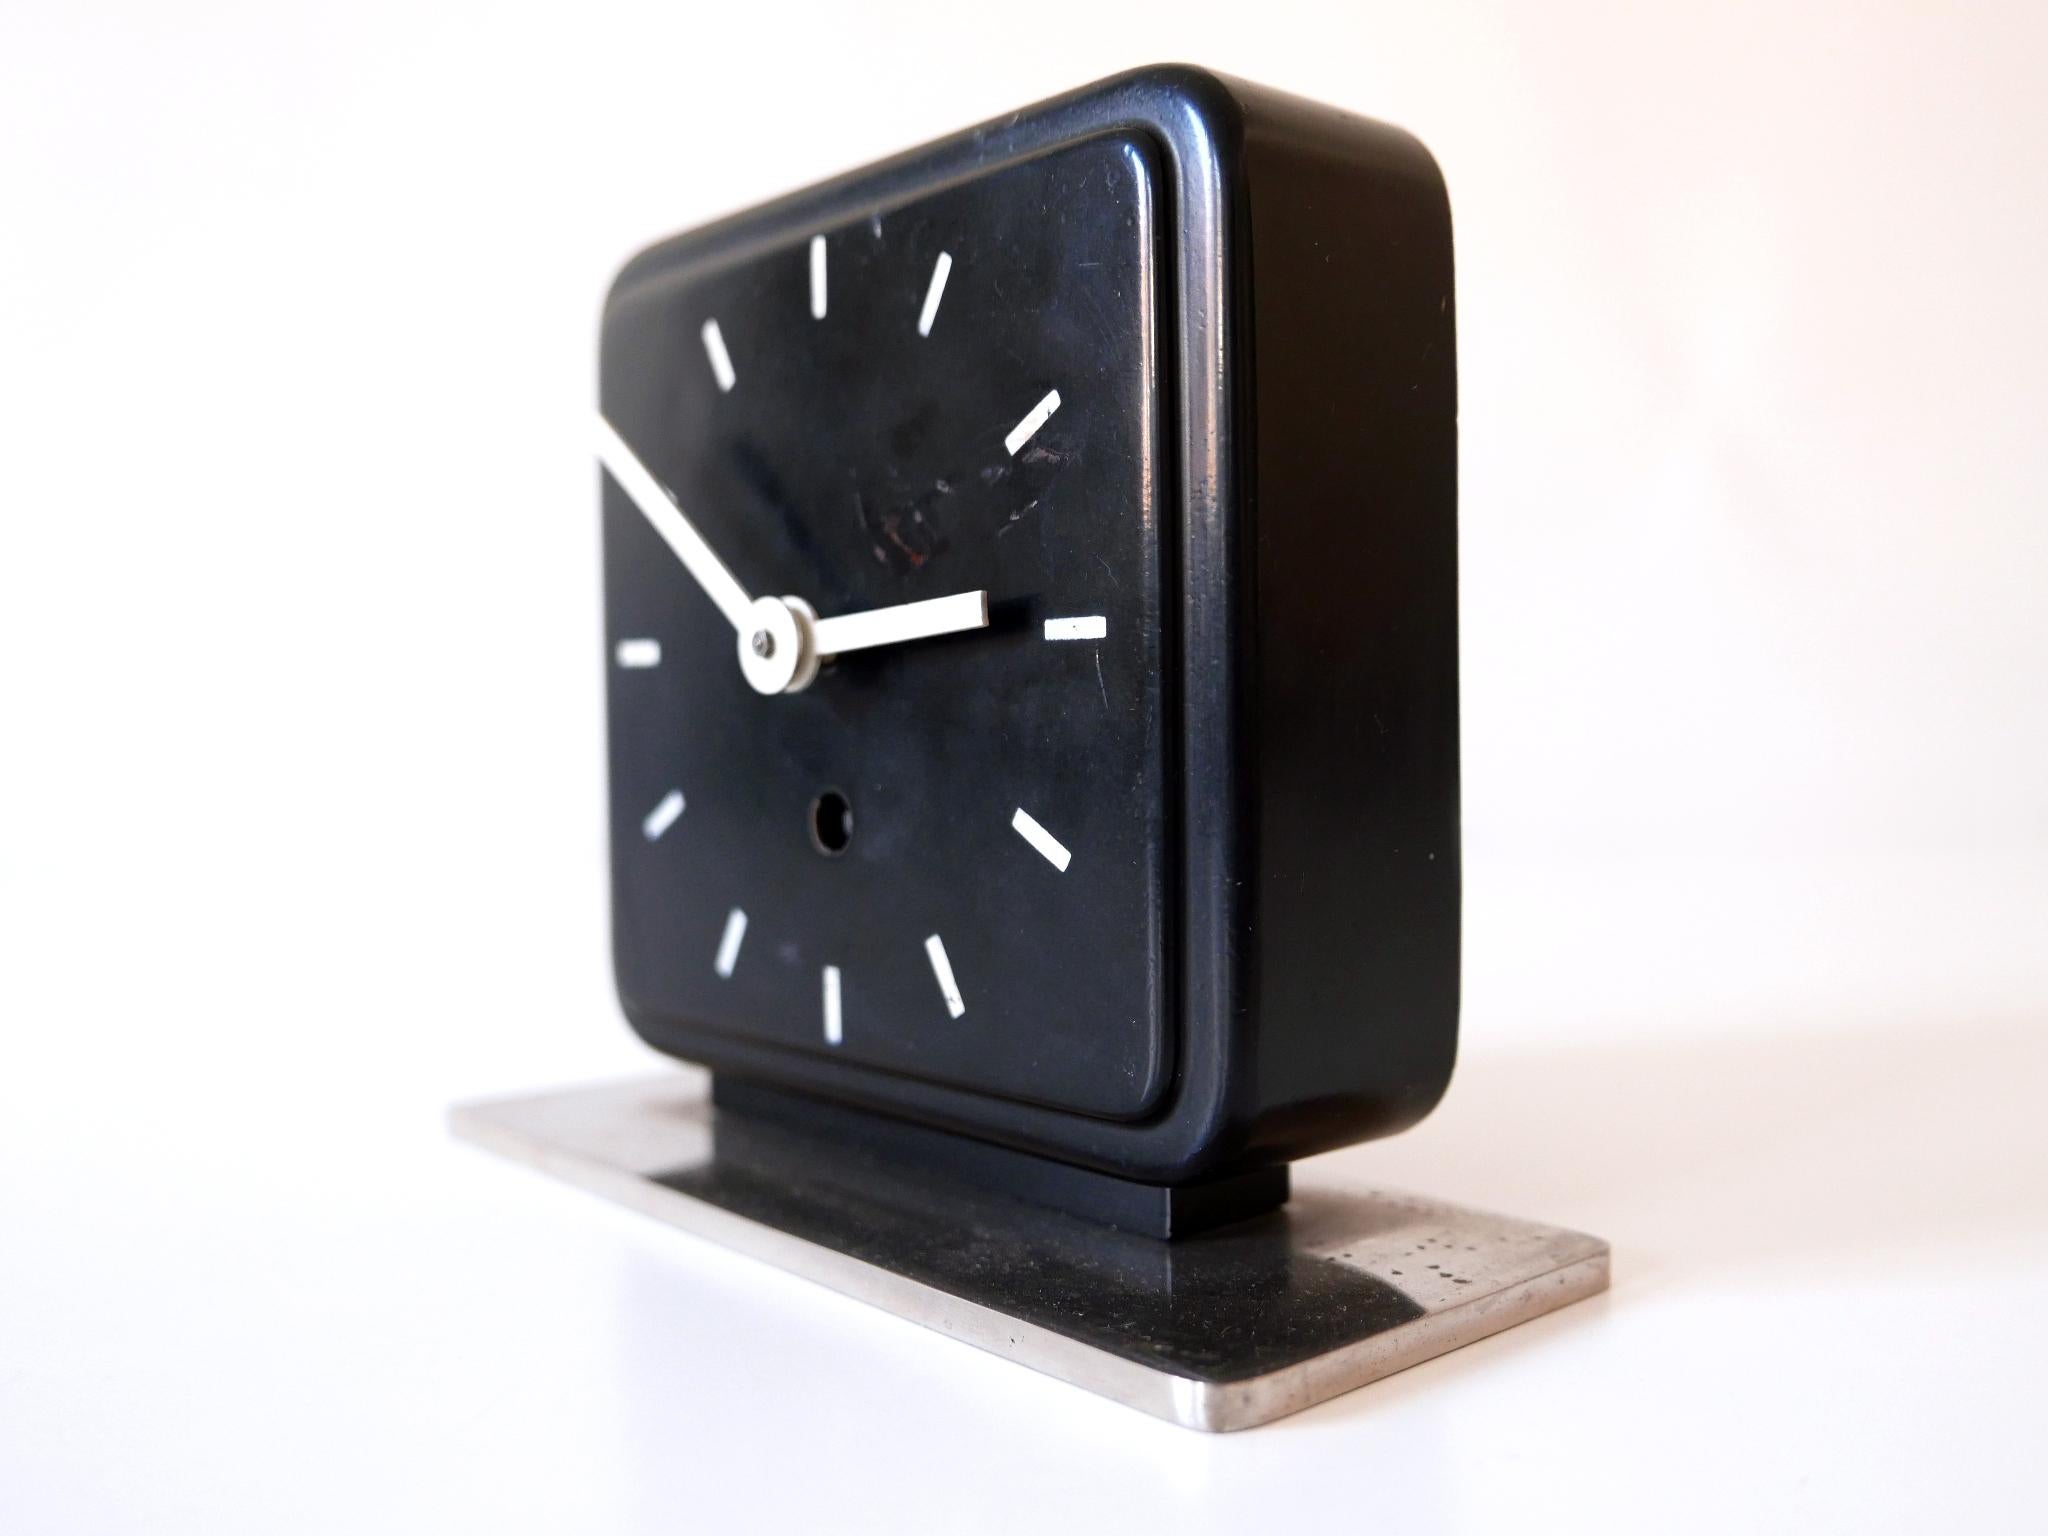 Metal Bauhaus Table or Desk Clock by Marianne Brandt for Ruppelwerk Gotha Germany 1932 For Sale